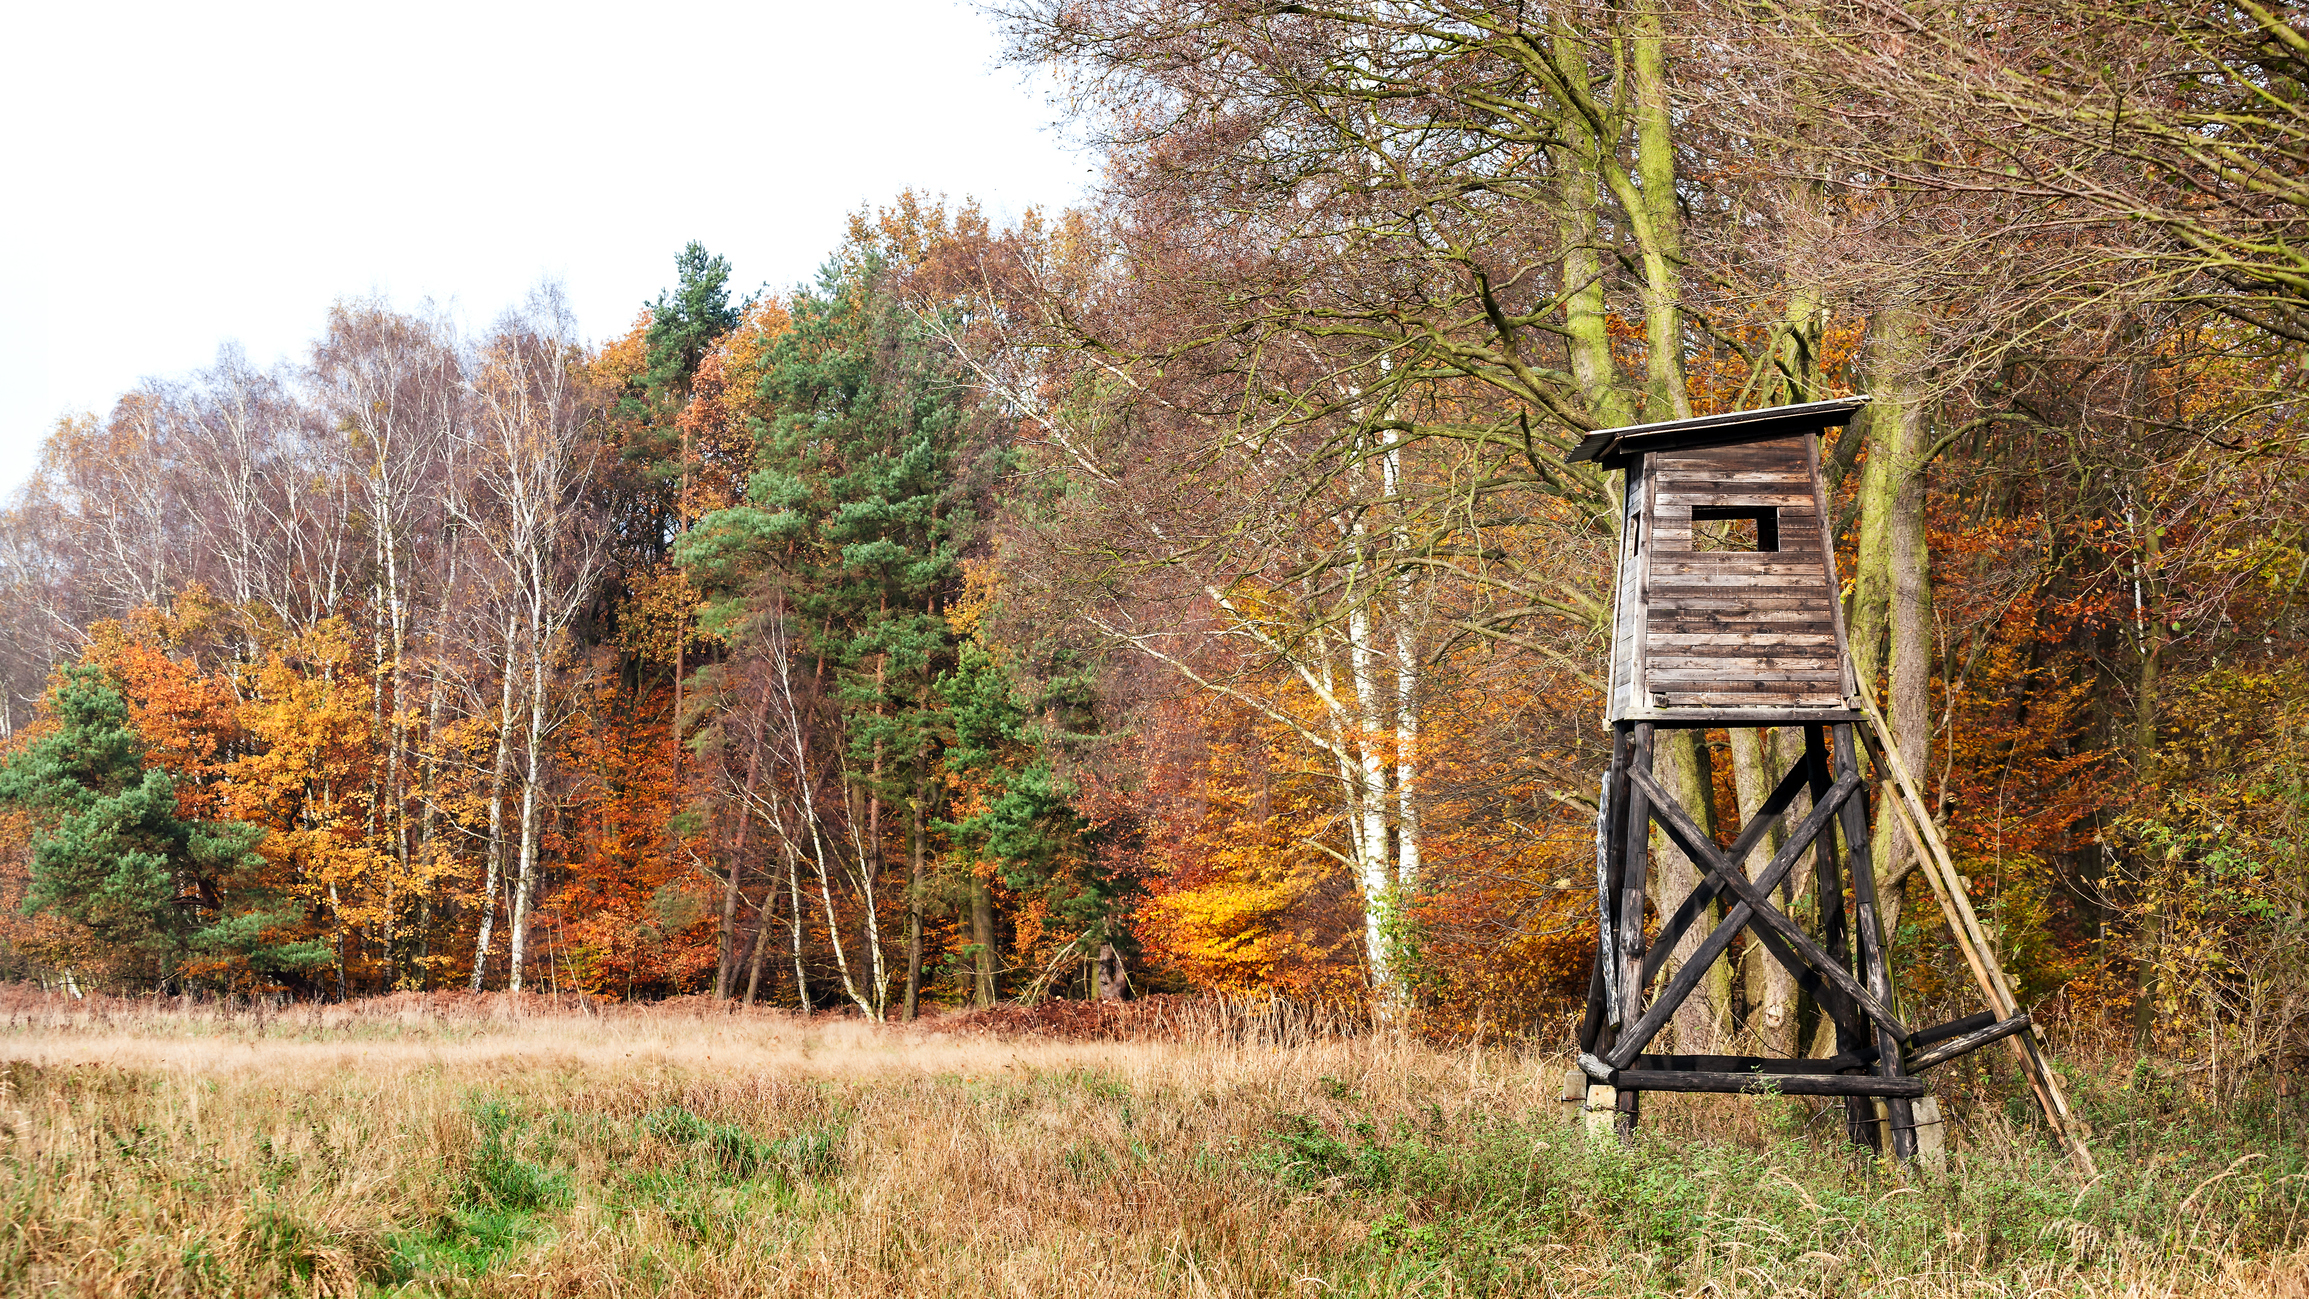 Panoramic view of a hunting pulpit in autumn overlooking a landscape filled with trees and grass